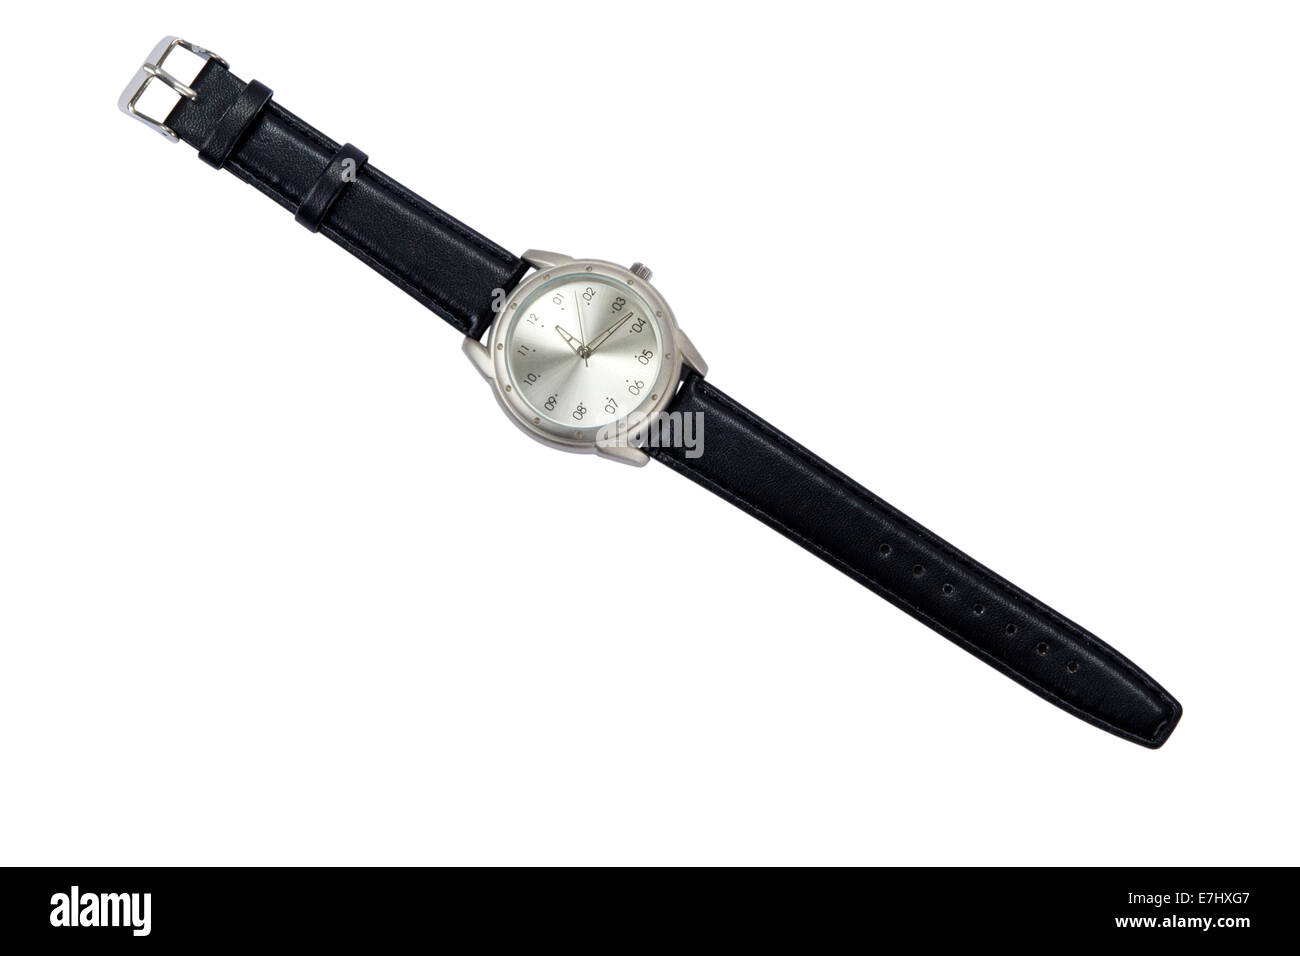 Analogique classique Men's Wrist Watch isolated over white background with clipping path Banque D'Images